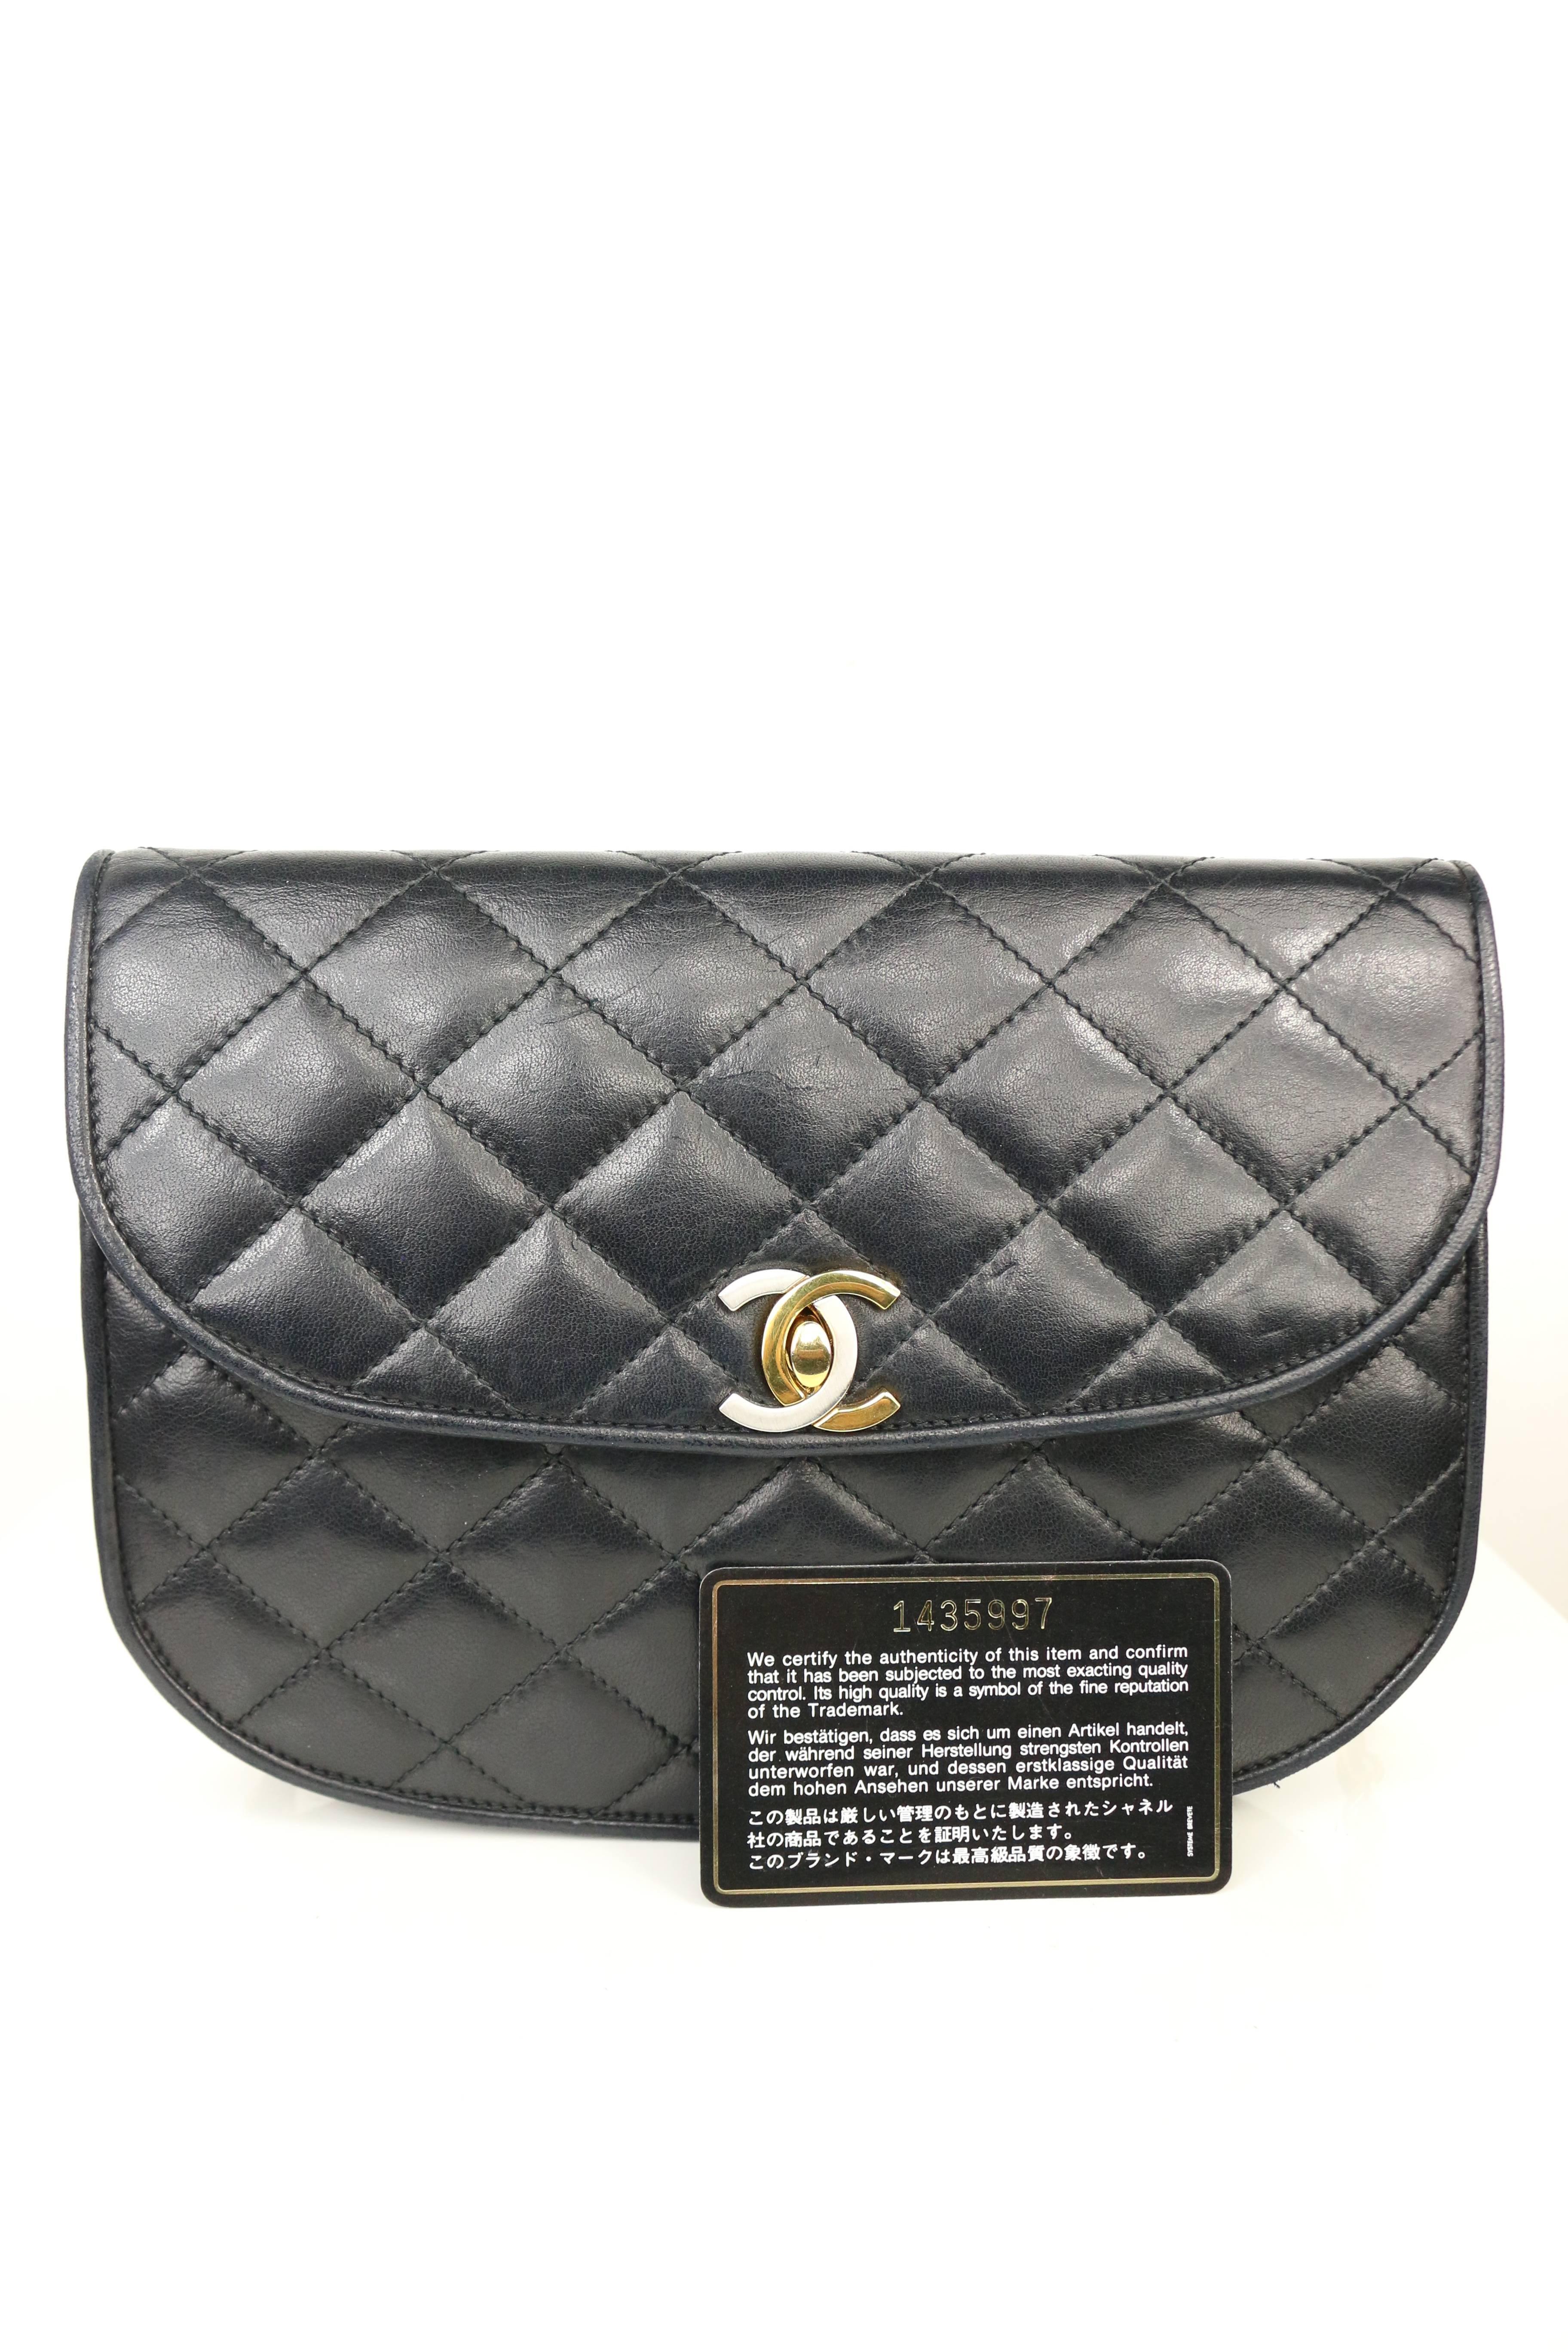 Chanel Semi-Circle Black Quilted Lamb Leather Paris Limited Edition Shoulder Bag 7